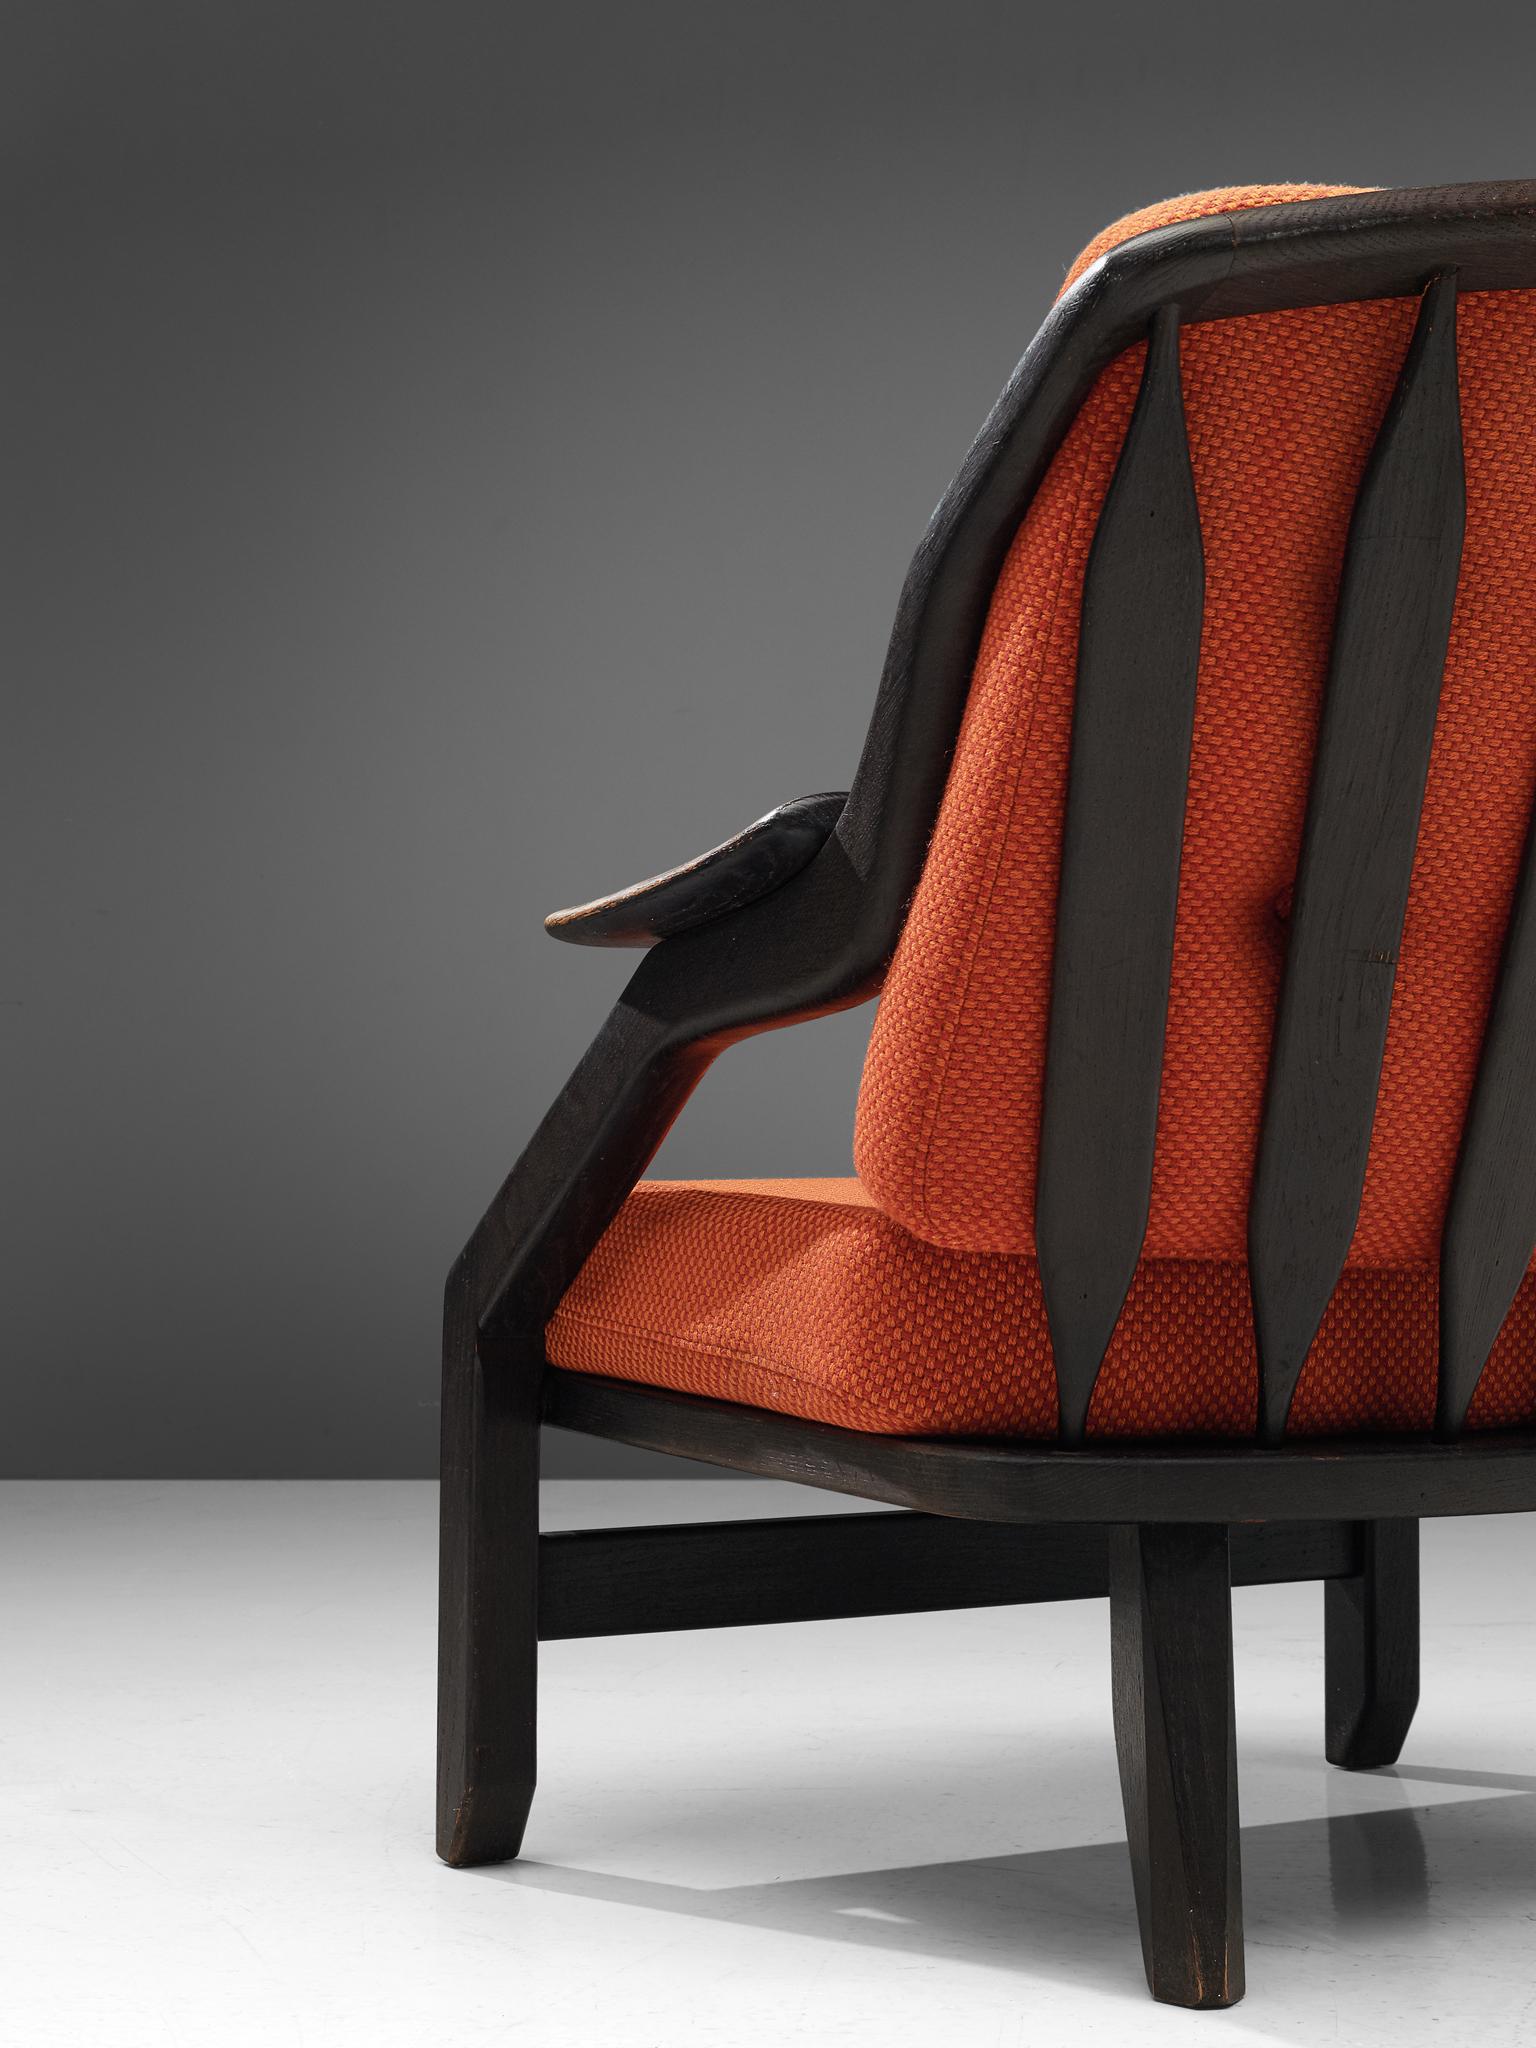 Pair of Lounge Chairs with Orange Upholstery by Guillerme & Chambron 2